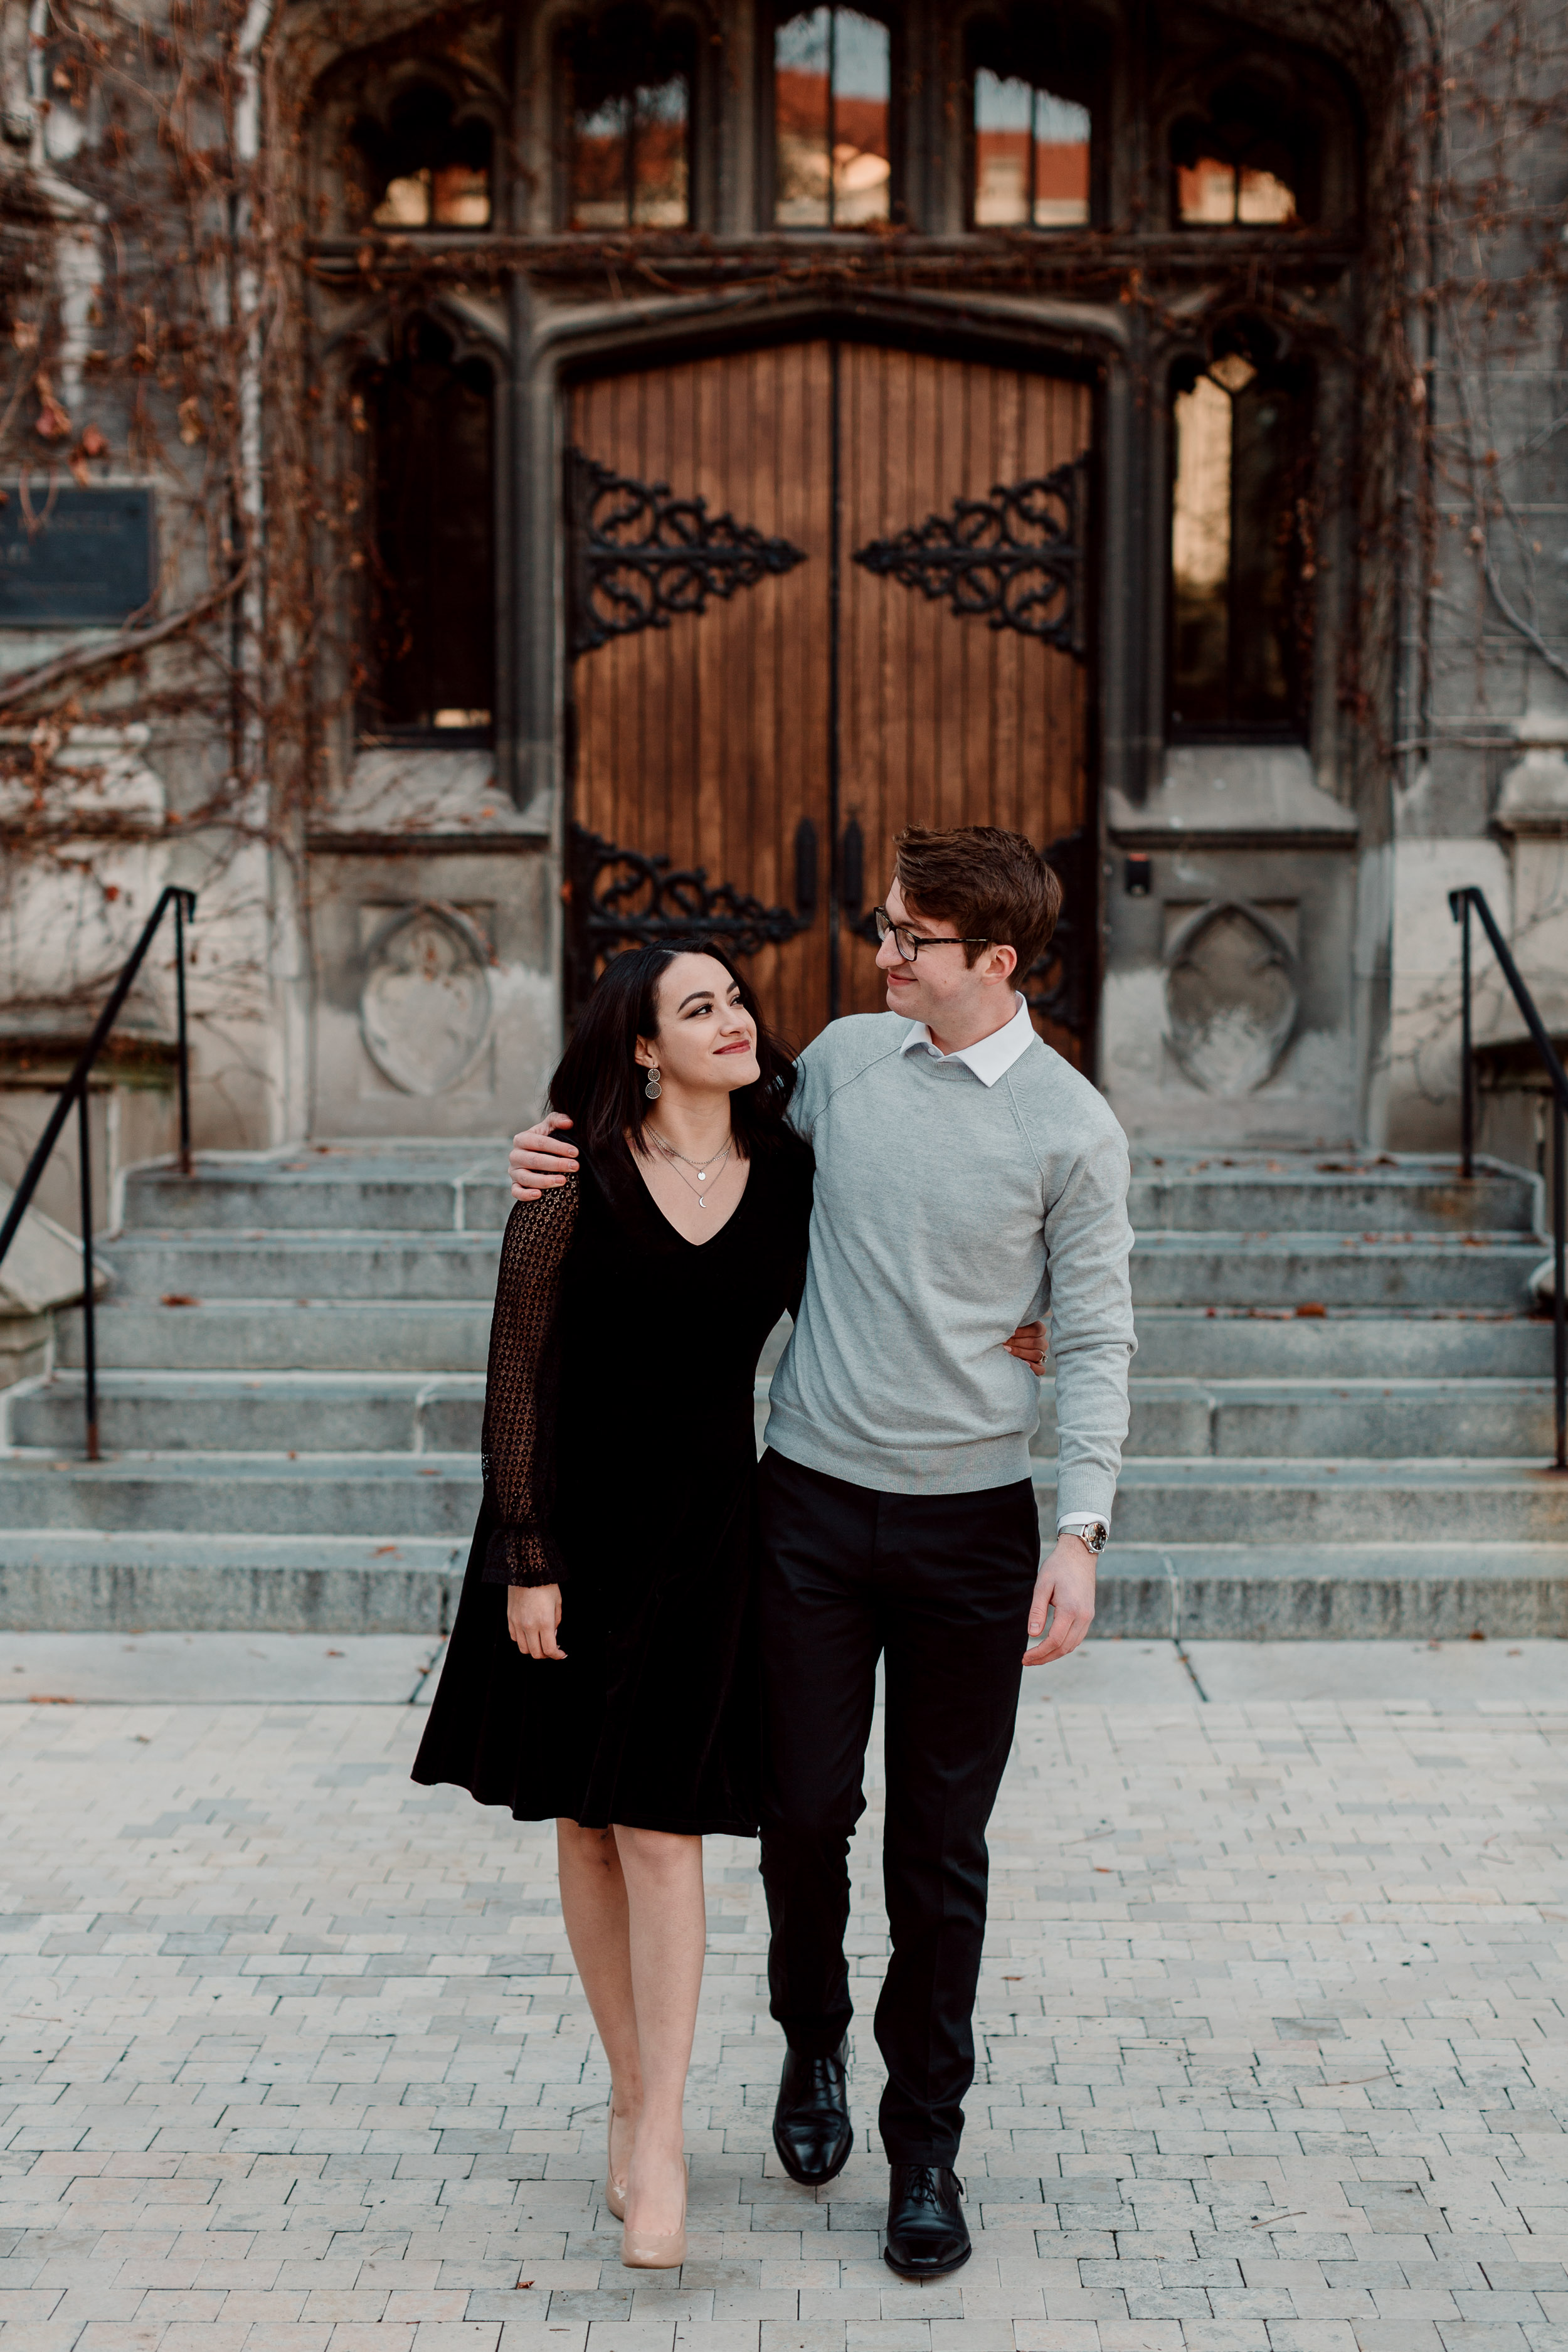 Chicago couple in front of university doors | University of Chicago campus engagement session | Chicago engagement photographer | Chicago engagement photo locations | Winter engagement in Chicago | Where to take Chicago engagement photos | Chicago skyline engagement